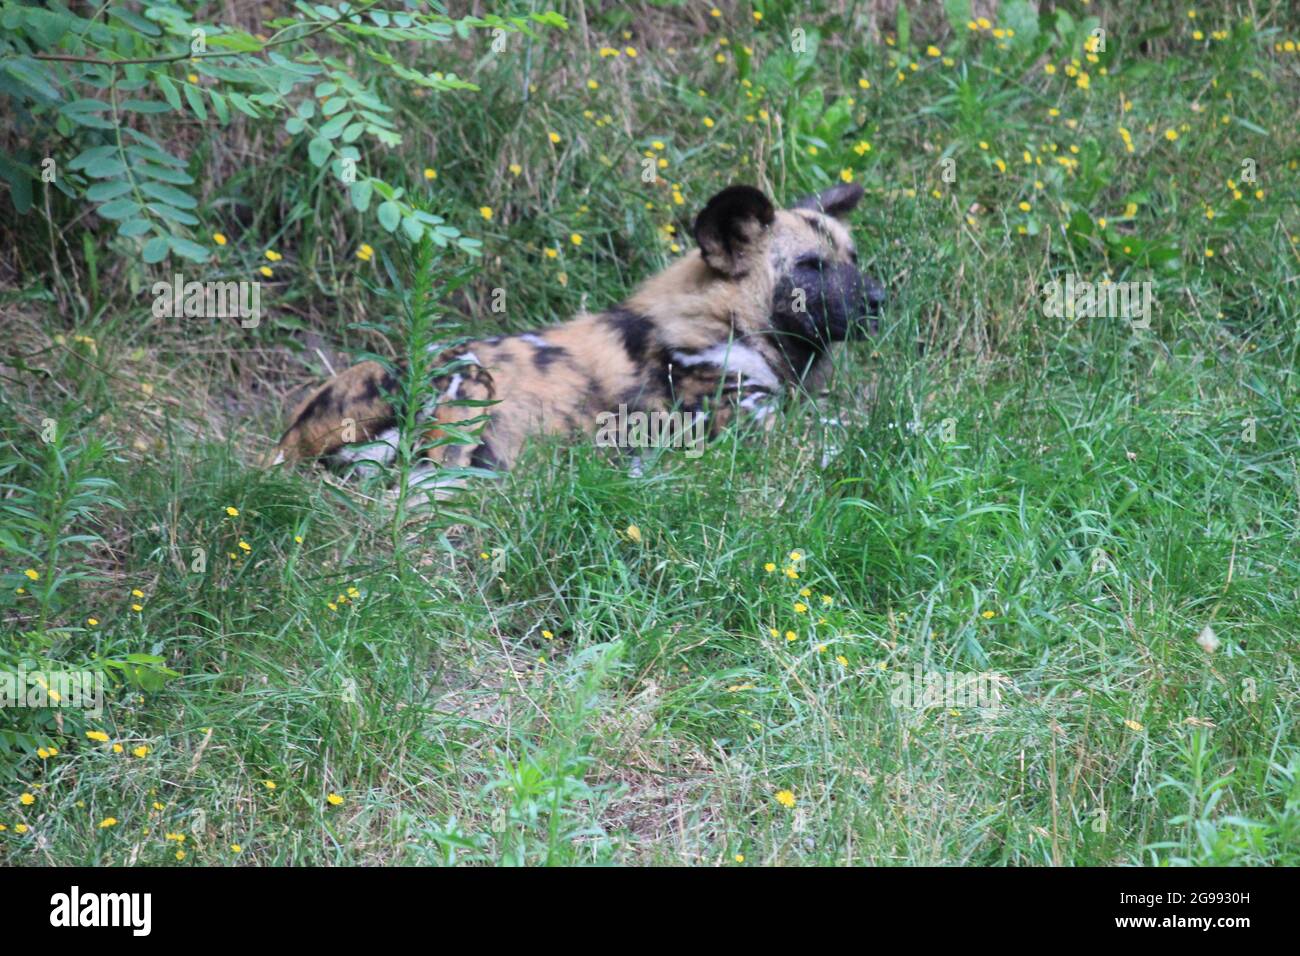 African wild dog in Overloon zoo, the Netherlands Stock Photo